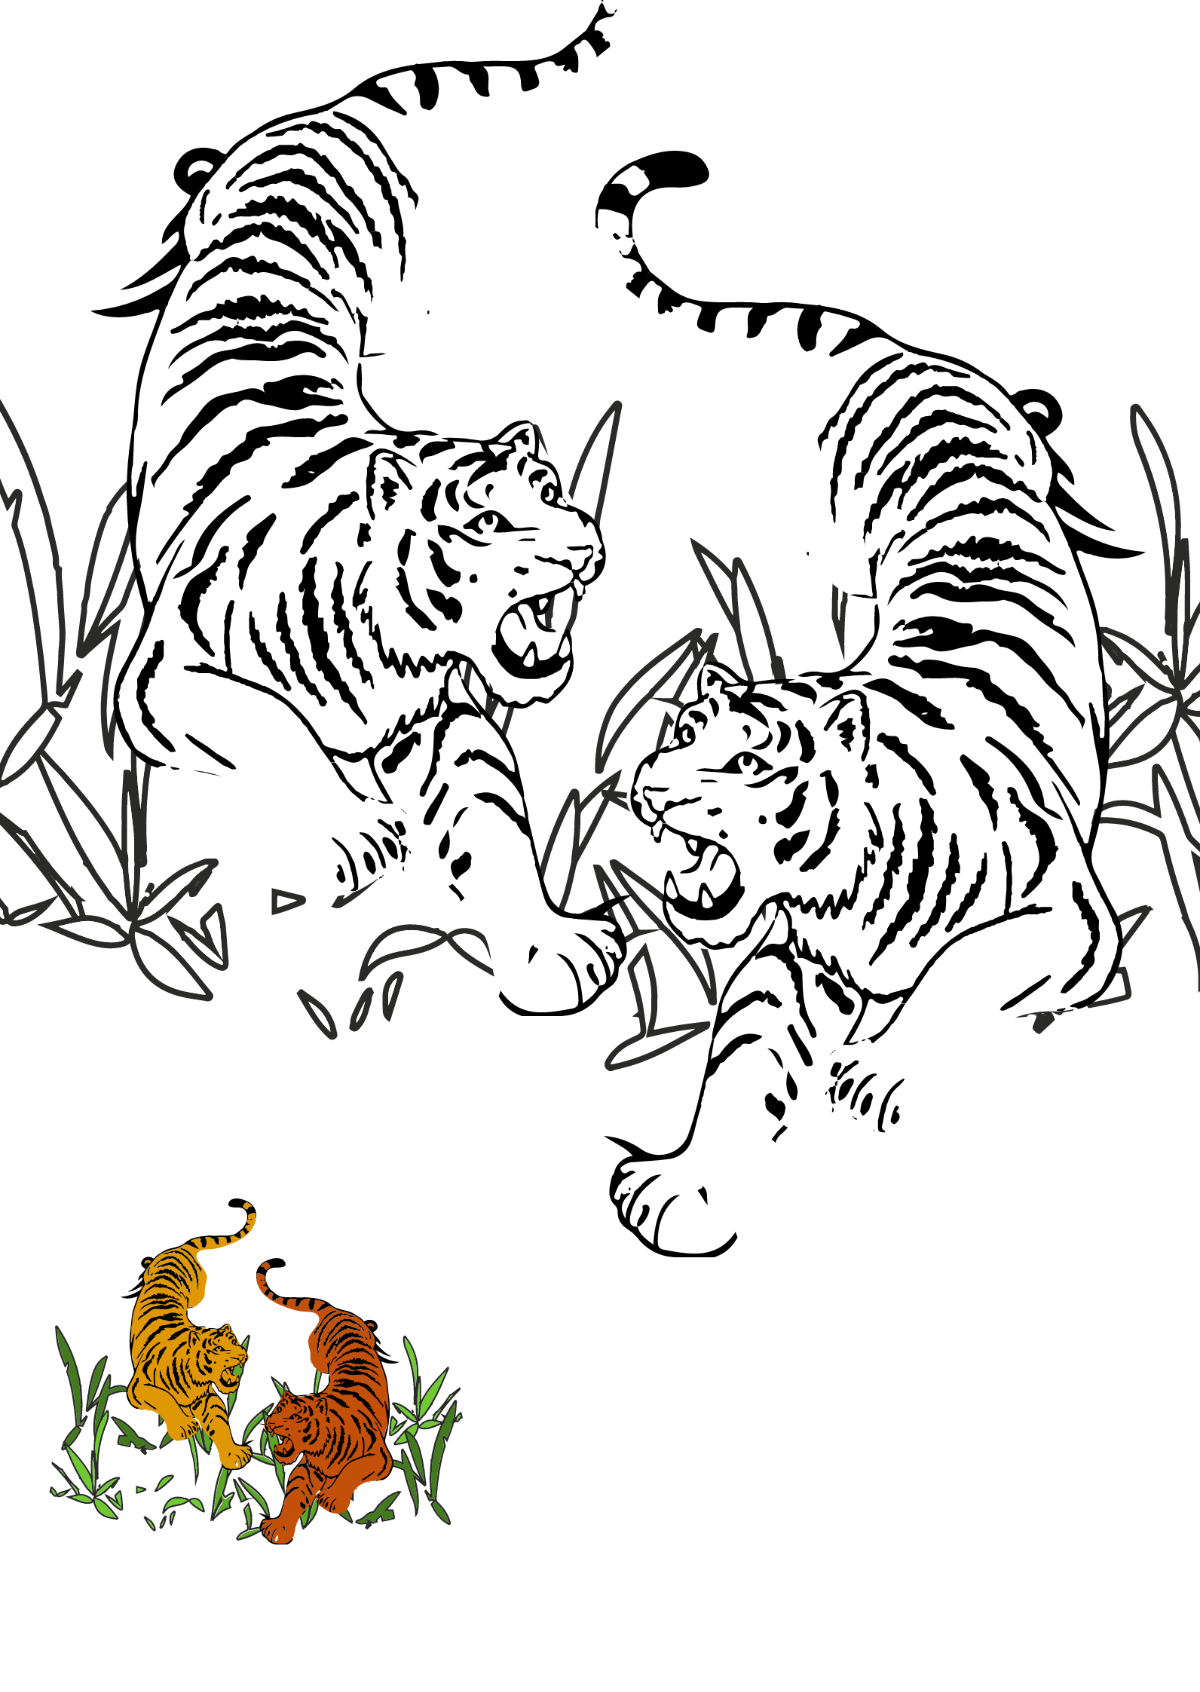 Angry Tiger Coloring Page Template